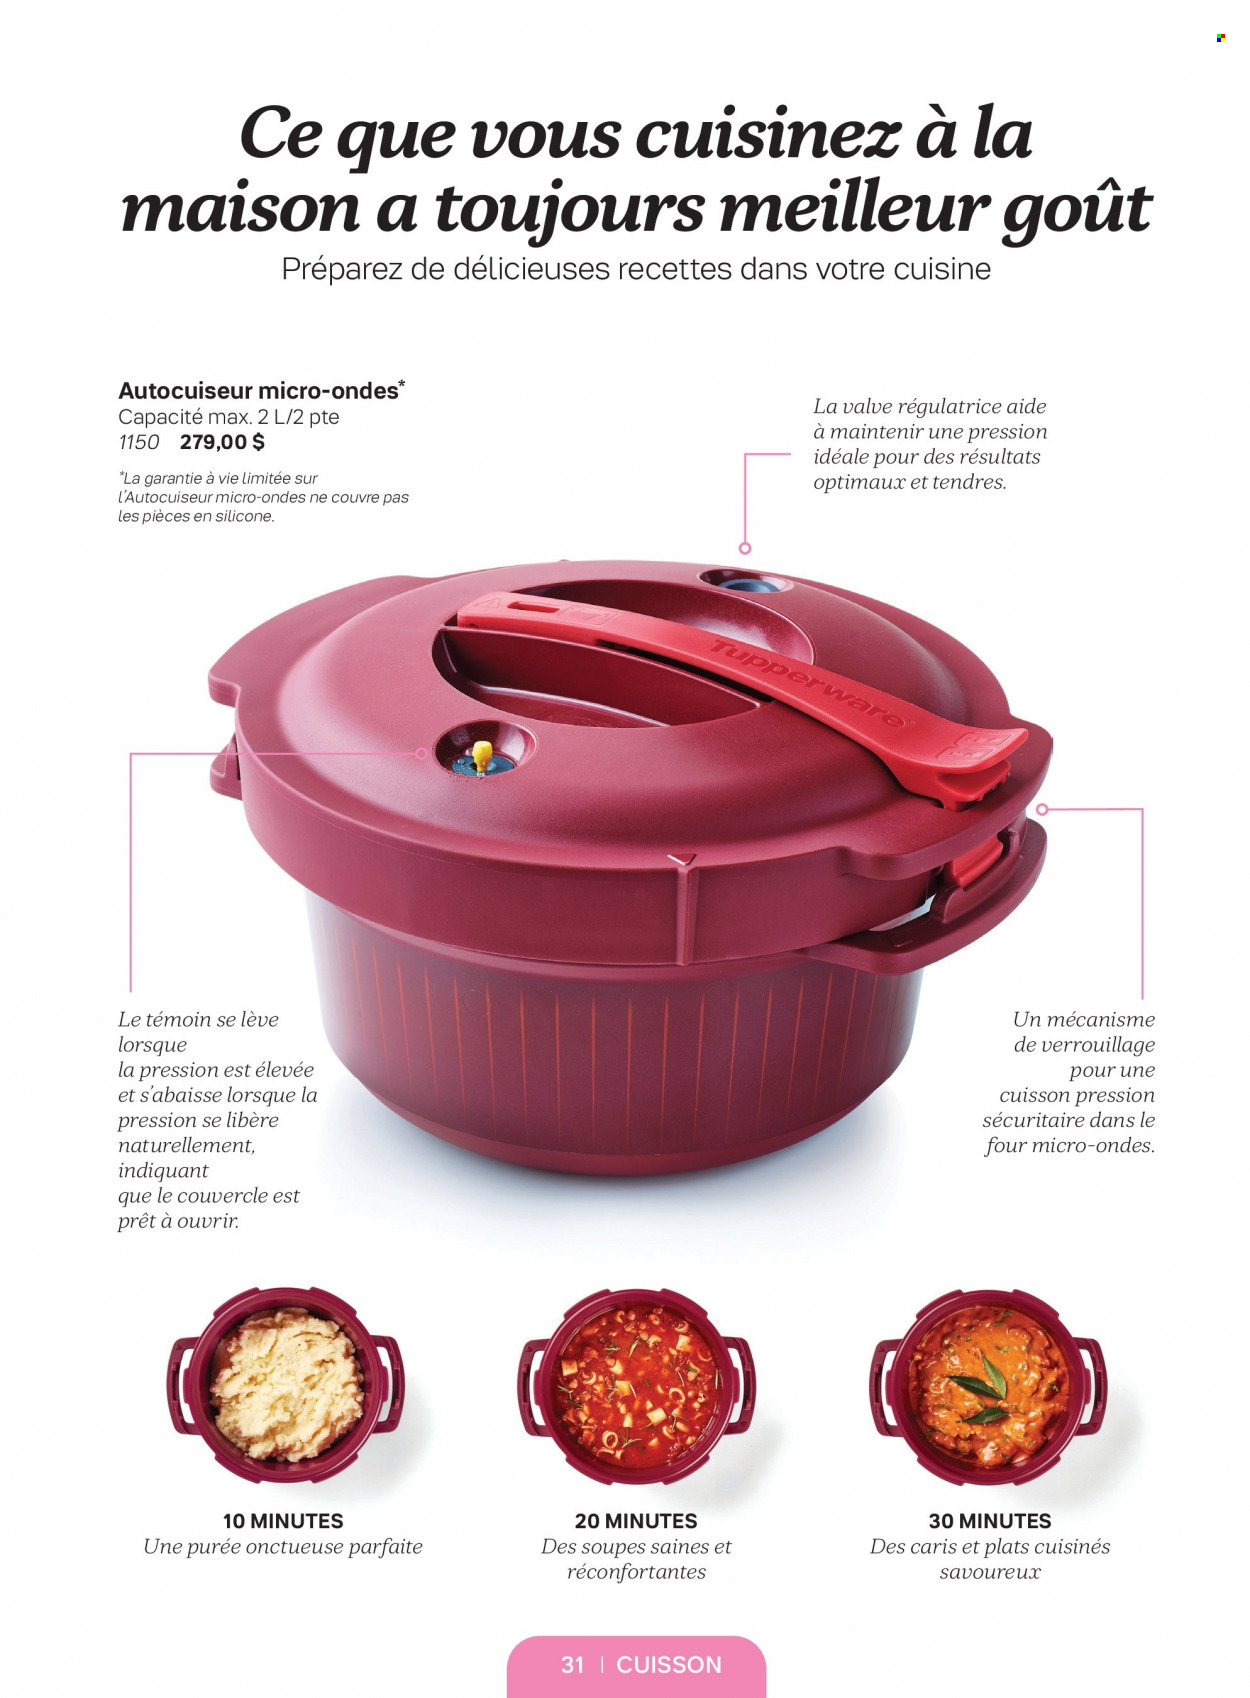 Circulaire Tupperware . Page 31.